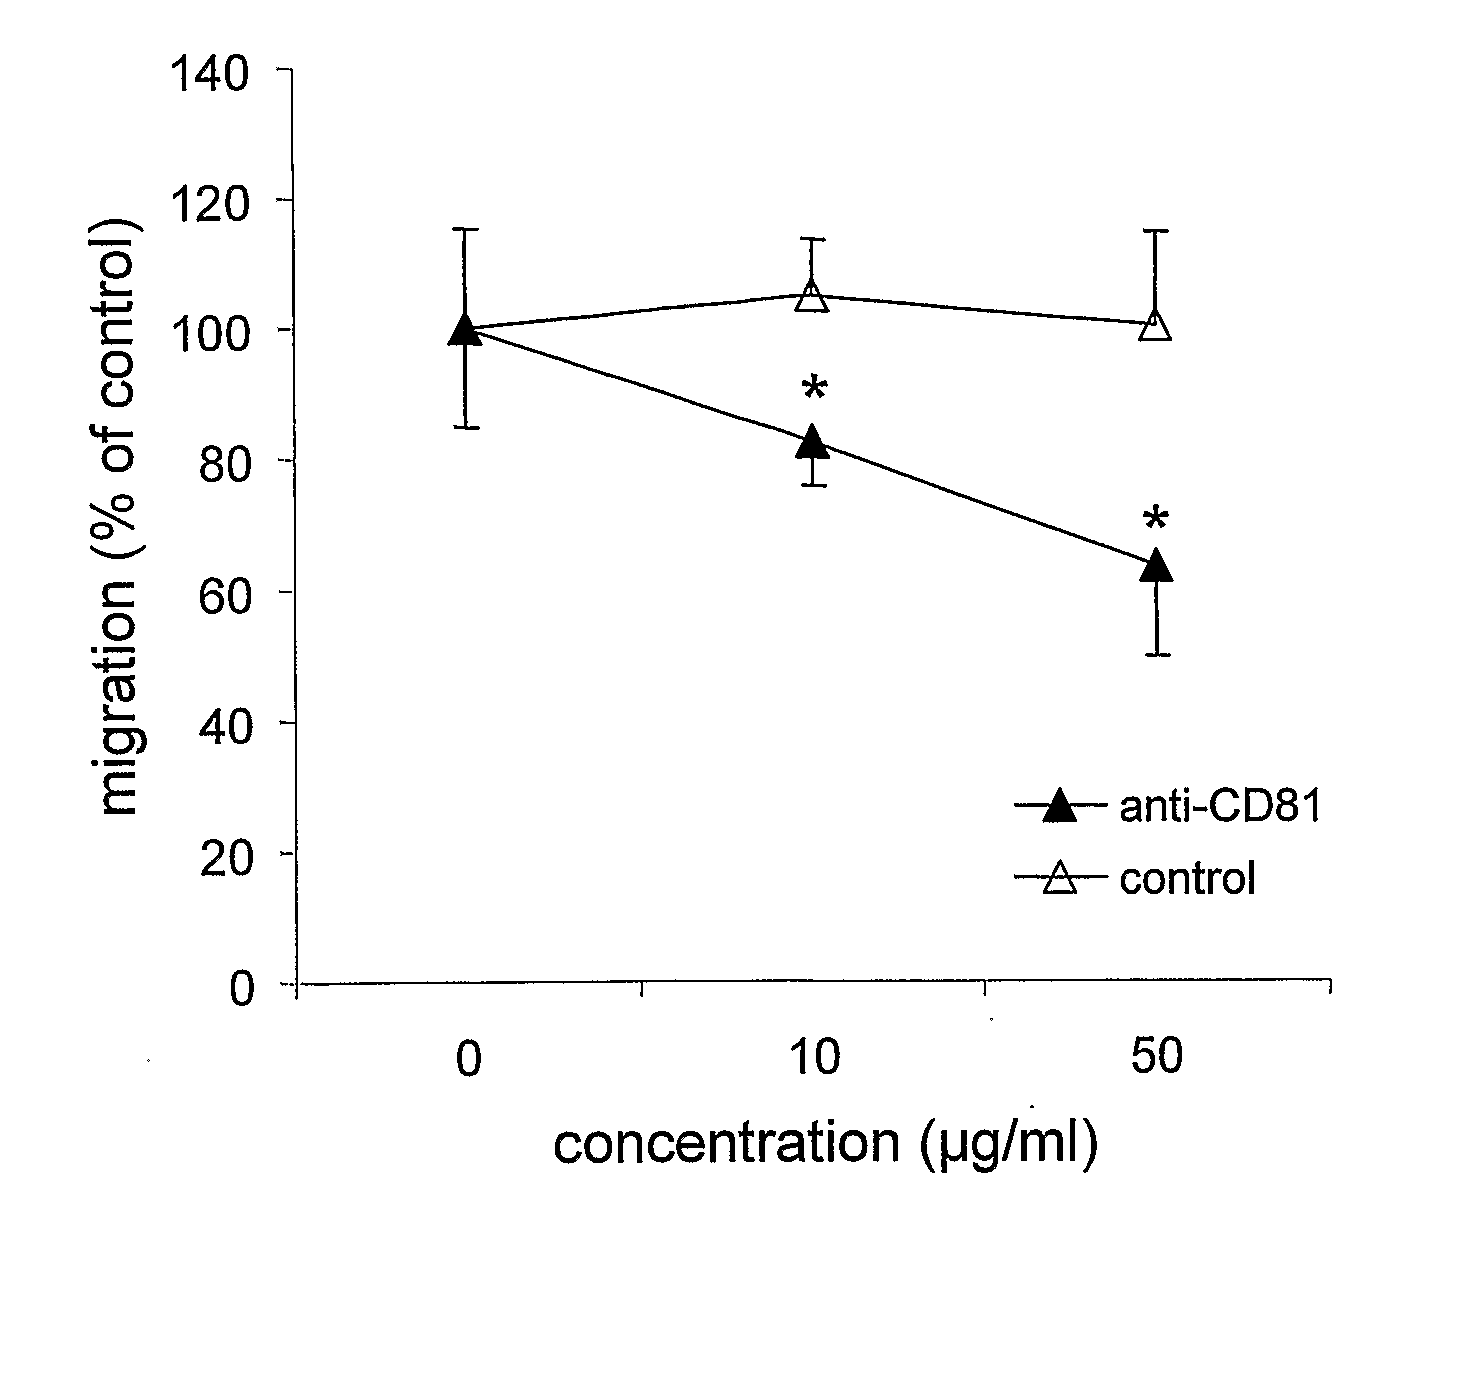 Method For Inhibiting The Transendothelial Migration Of Cells Such As Leukocytes Or Tumor Cells By A Cd-Binding Substance And Uses Thereof